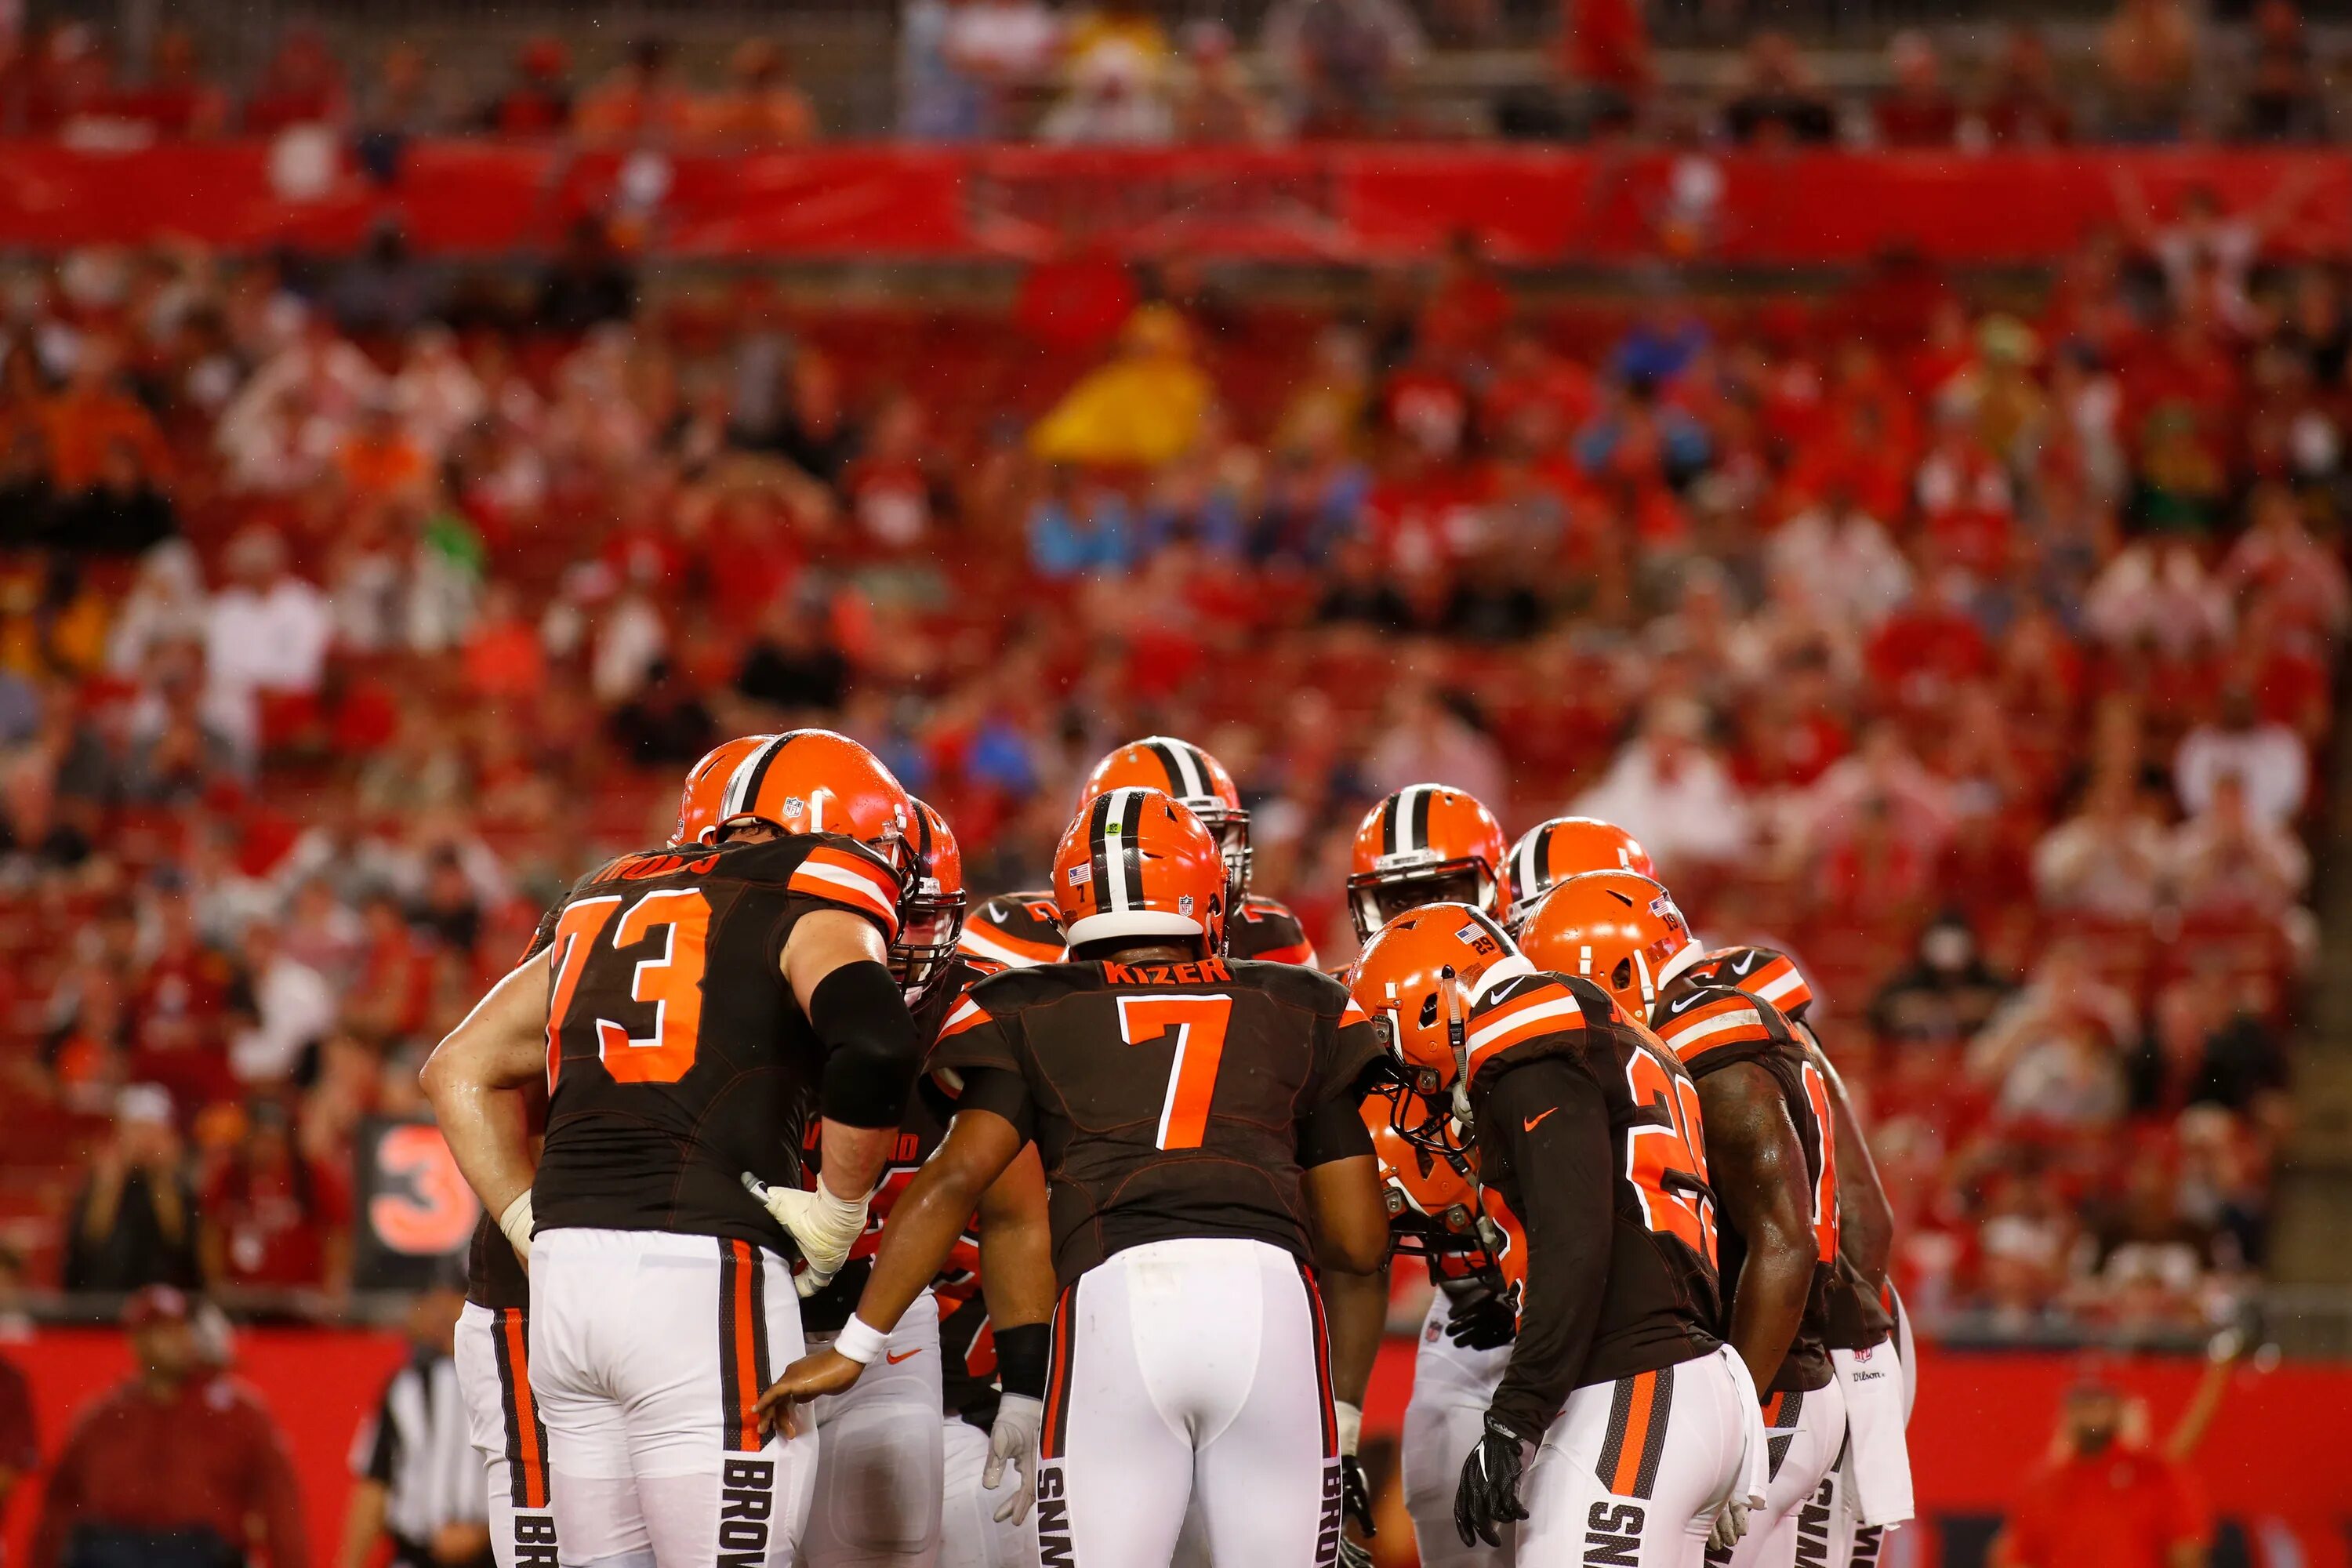 Browns com. Cleveland Browns. NFL Cleveland Browns. Бреед Browns. R .Brown.